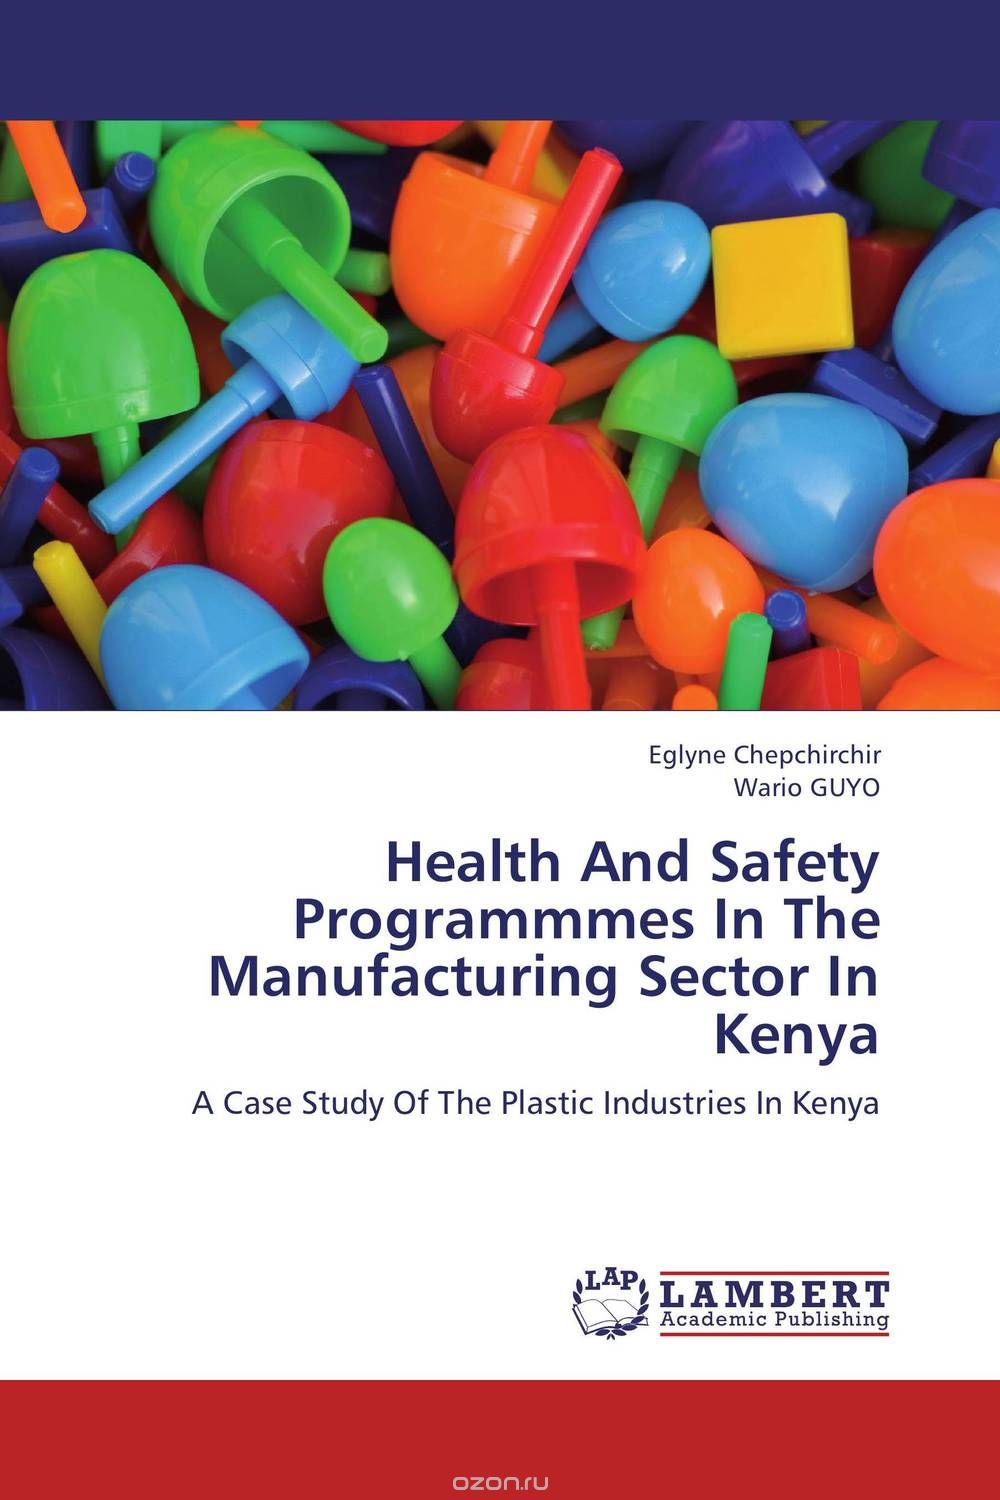 Health And Safety Programmmes In The Manufacturing Sector In Kenya